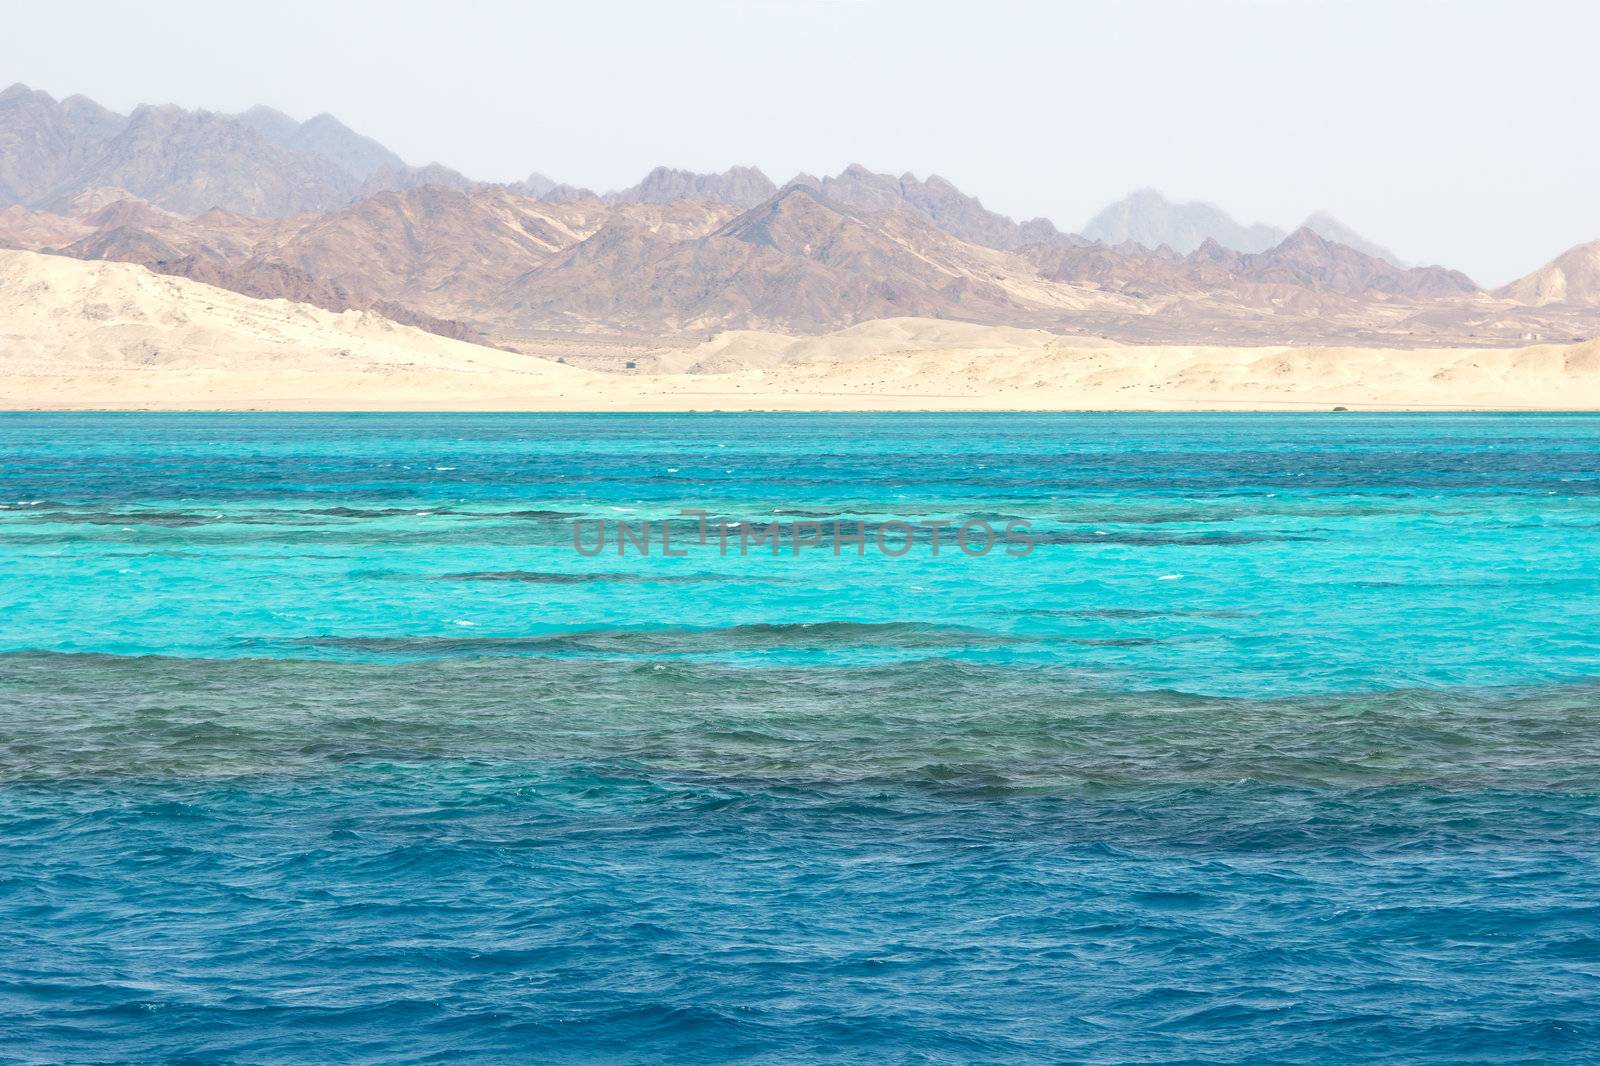 Ras Mohammed in the Red Sea, Egypt by Brigida_Soriano